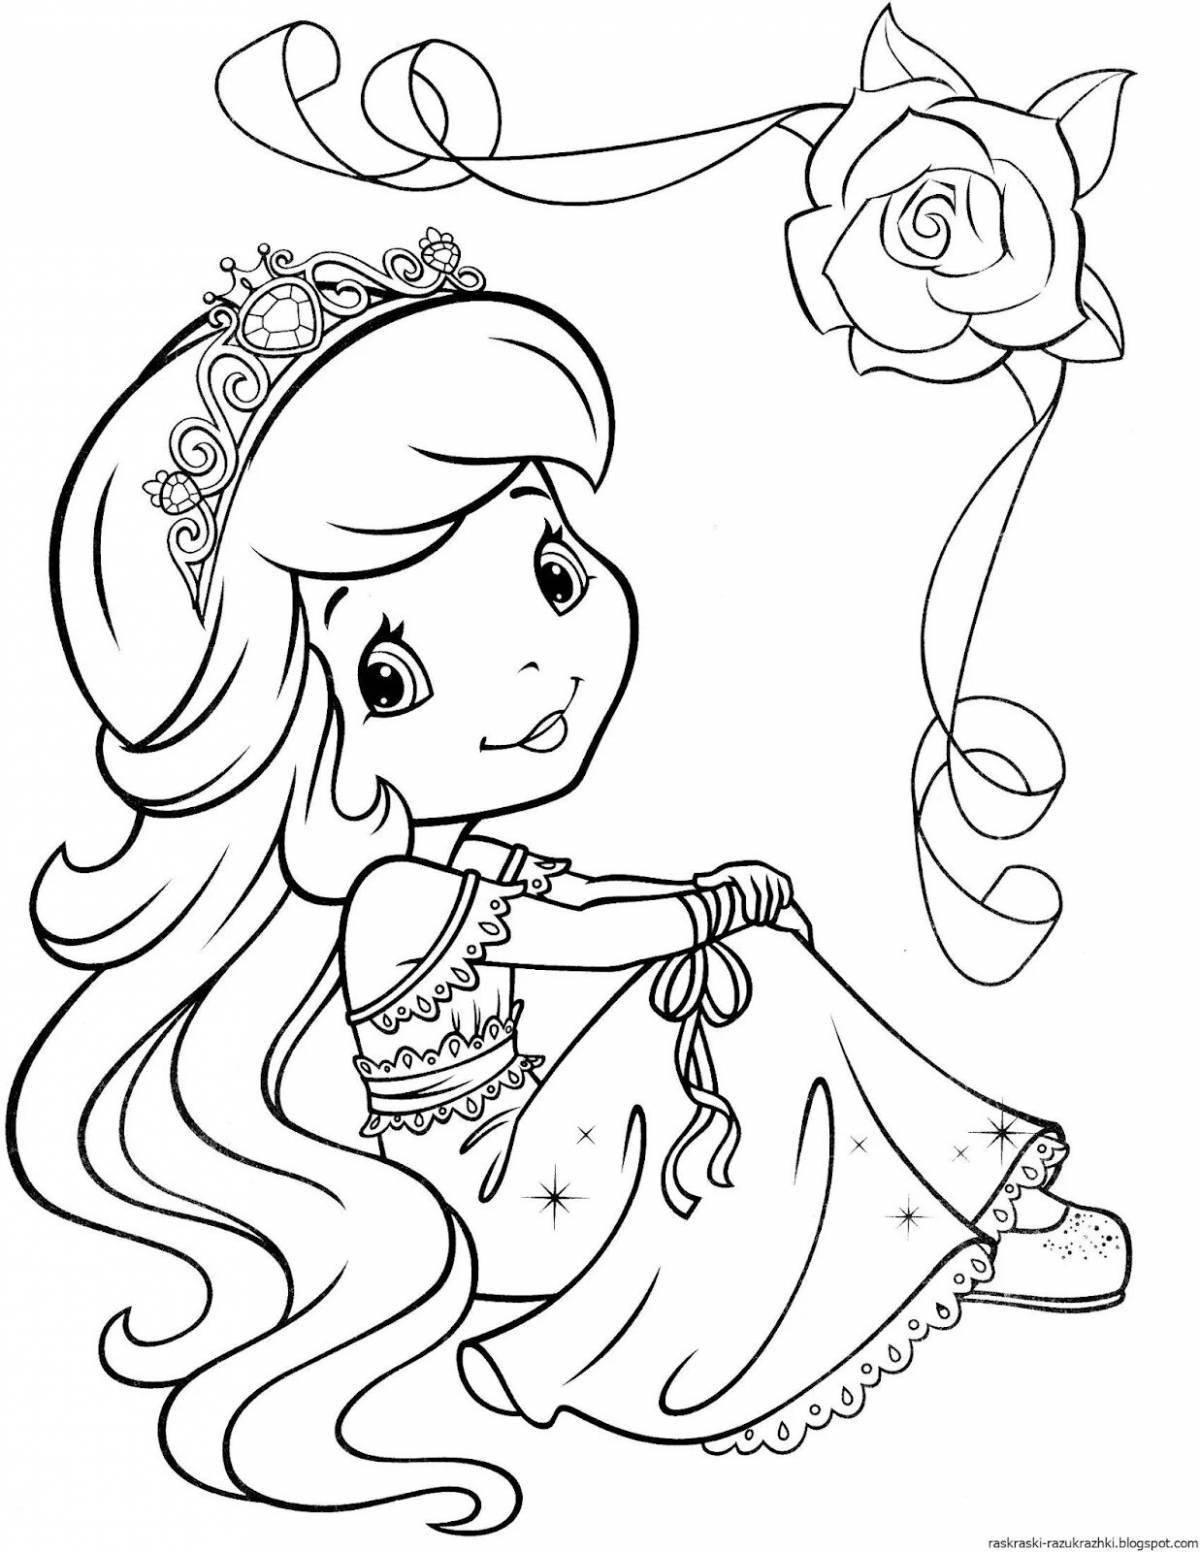 Radiant coloring book for children 5 years old for girls